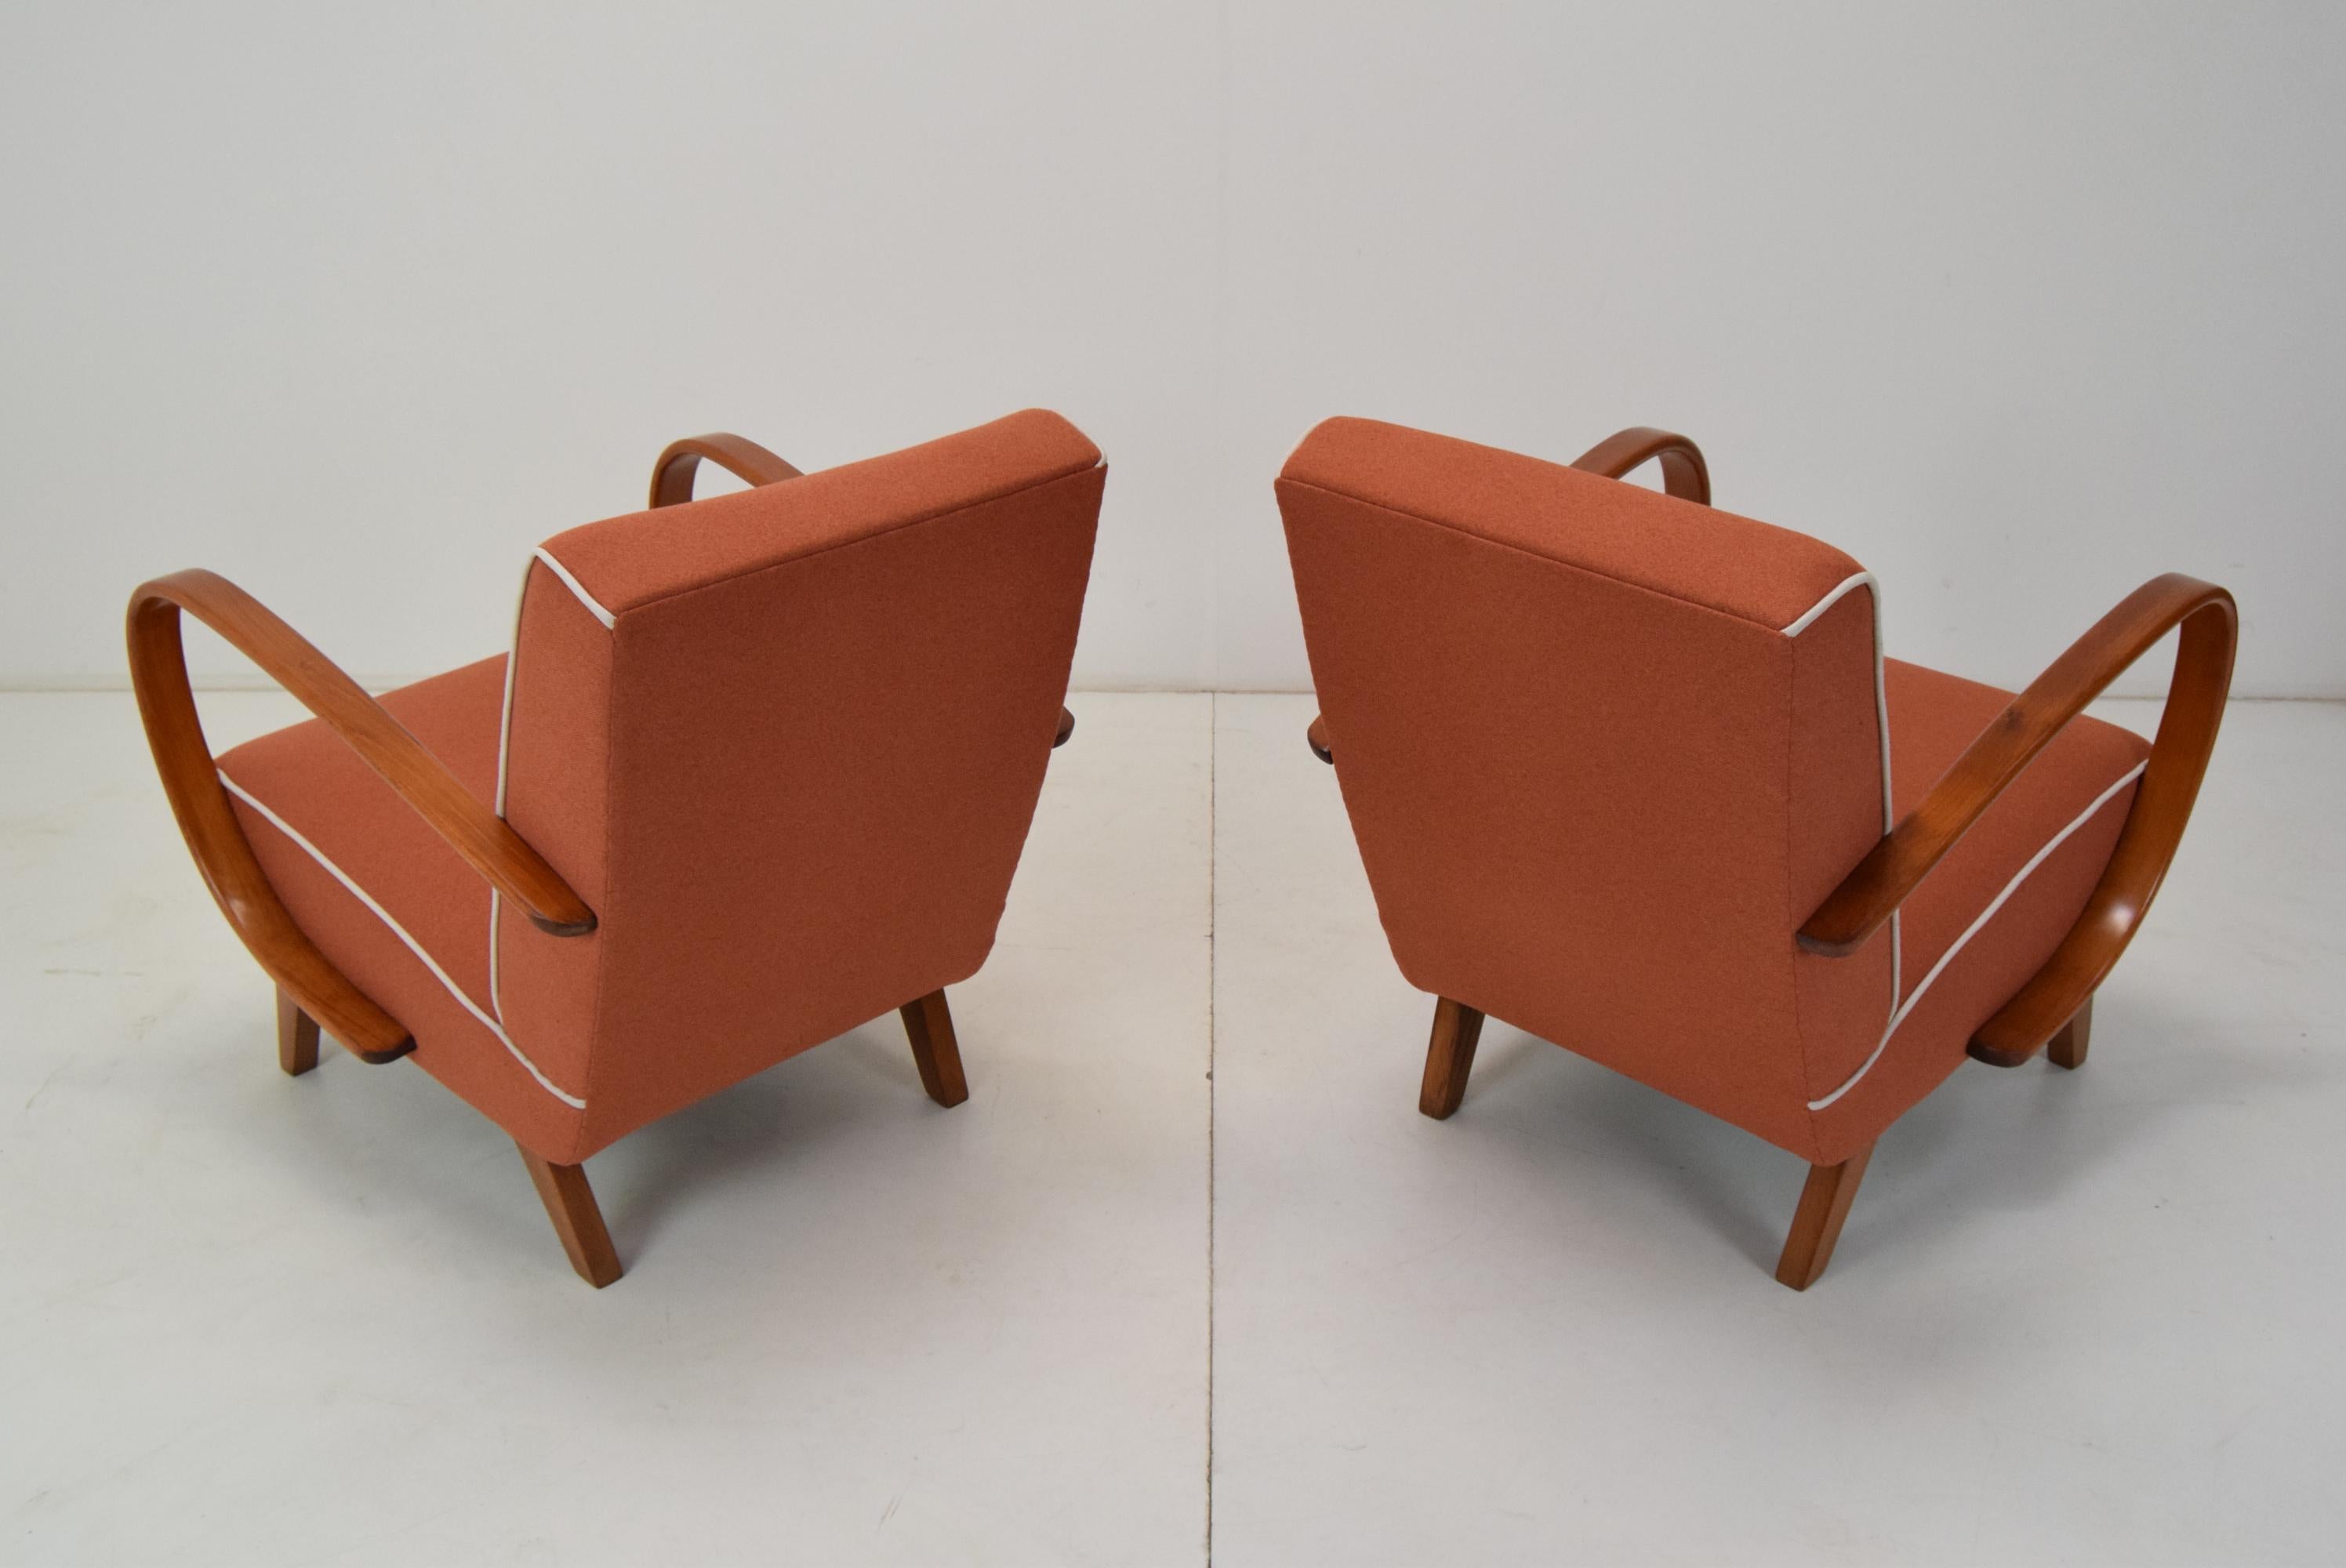 Fabric Pair of Mid-Century Armchairs by Jindrich Halabala, 1950s For Sale